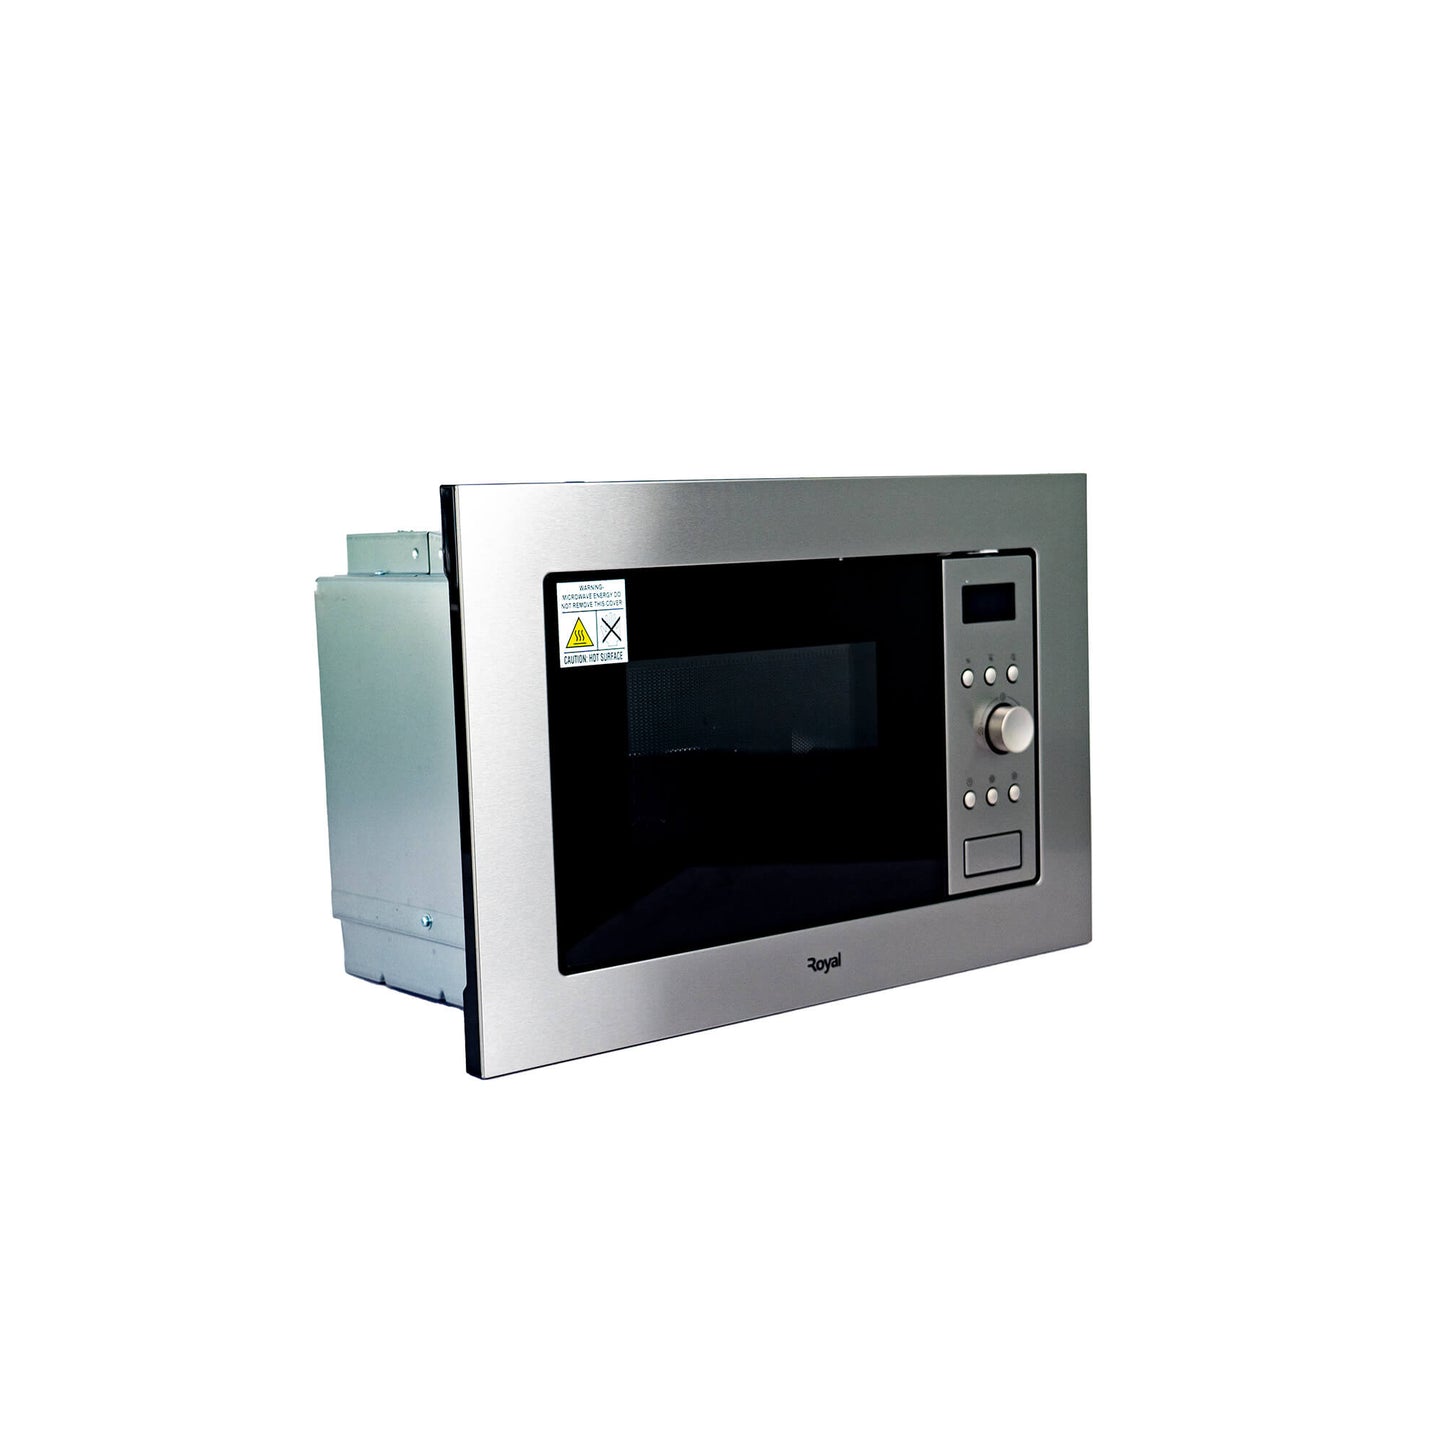 Royal 20-Litre Built-In Microwave Oven RBIMW20S